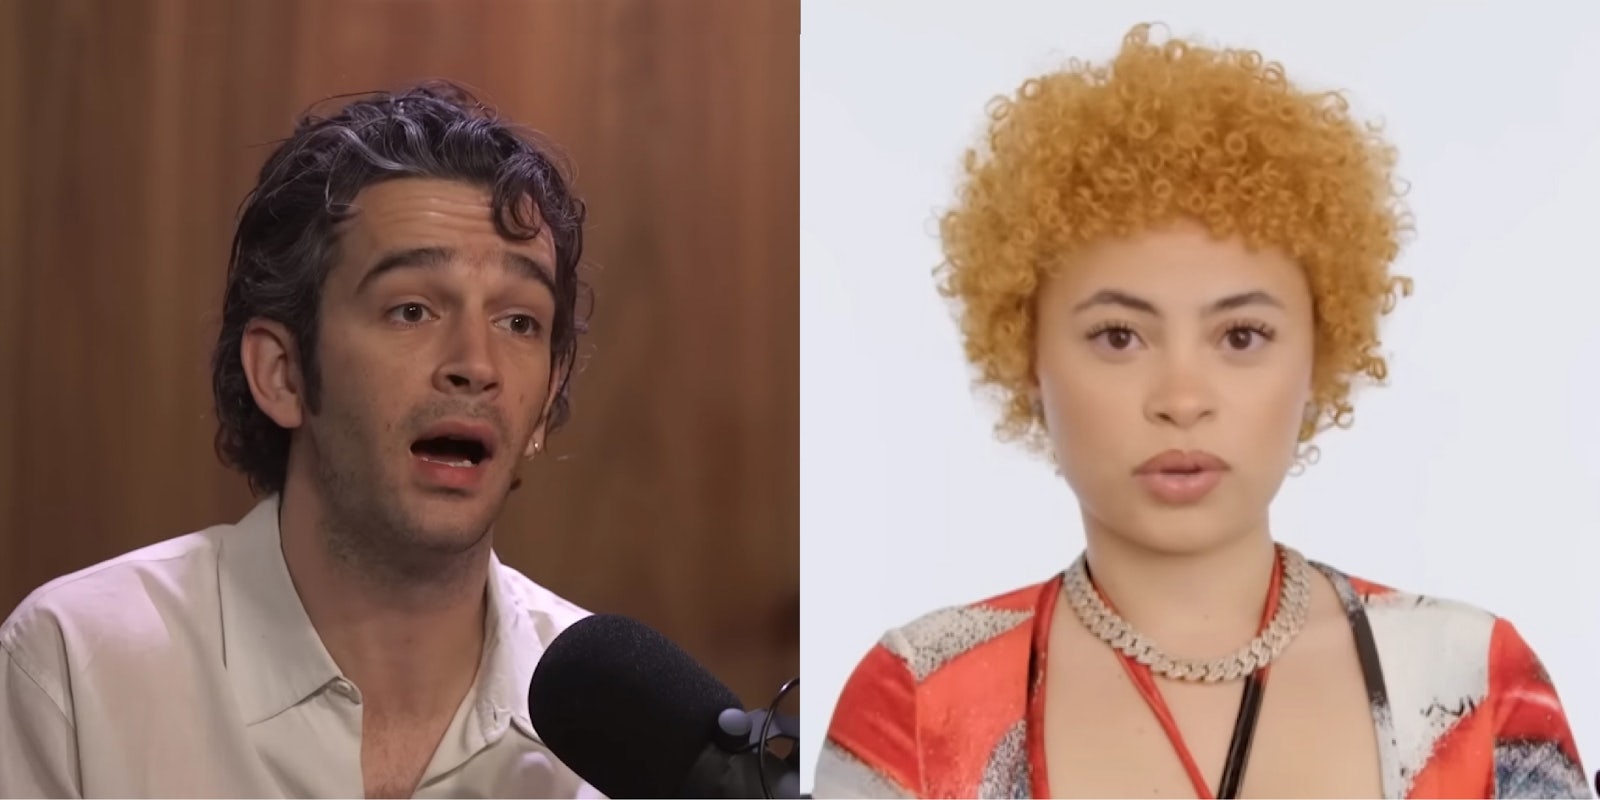 Matty Healy speaking into microphone in front of blurred brown background (l) Ice Spice speaking in front of light grey background (r)